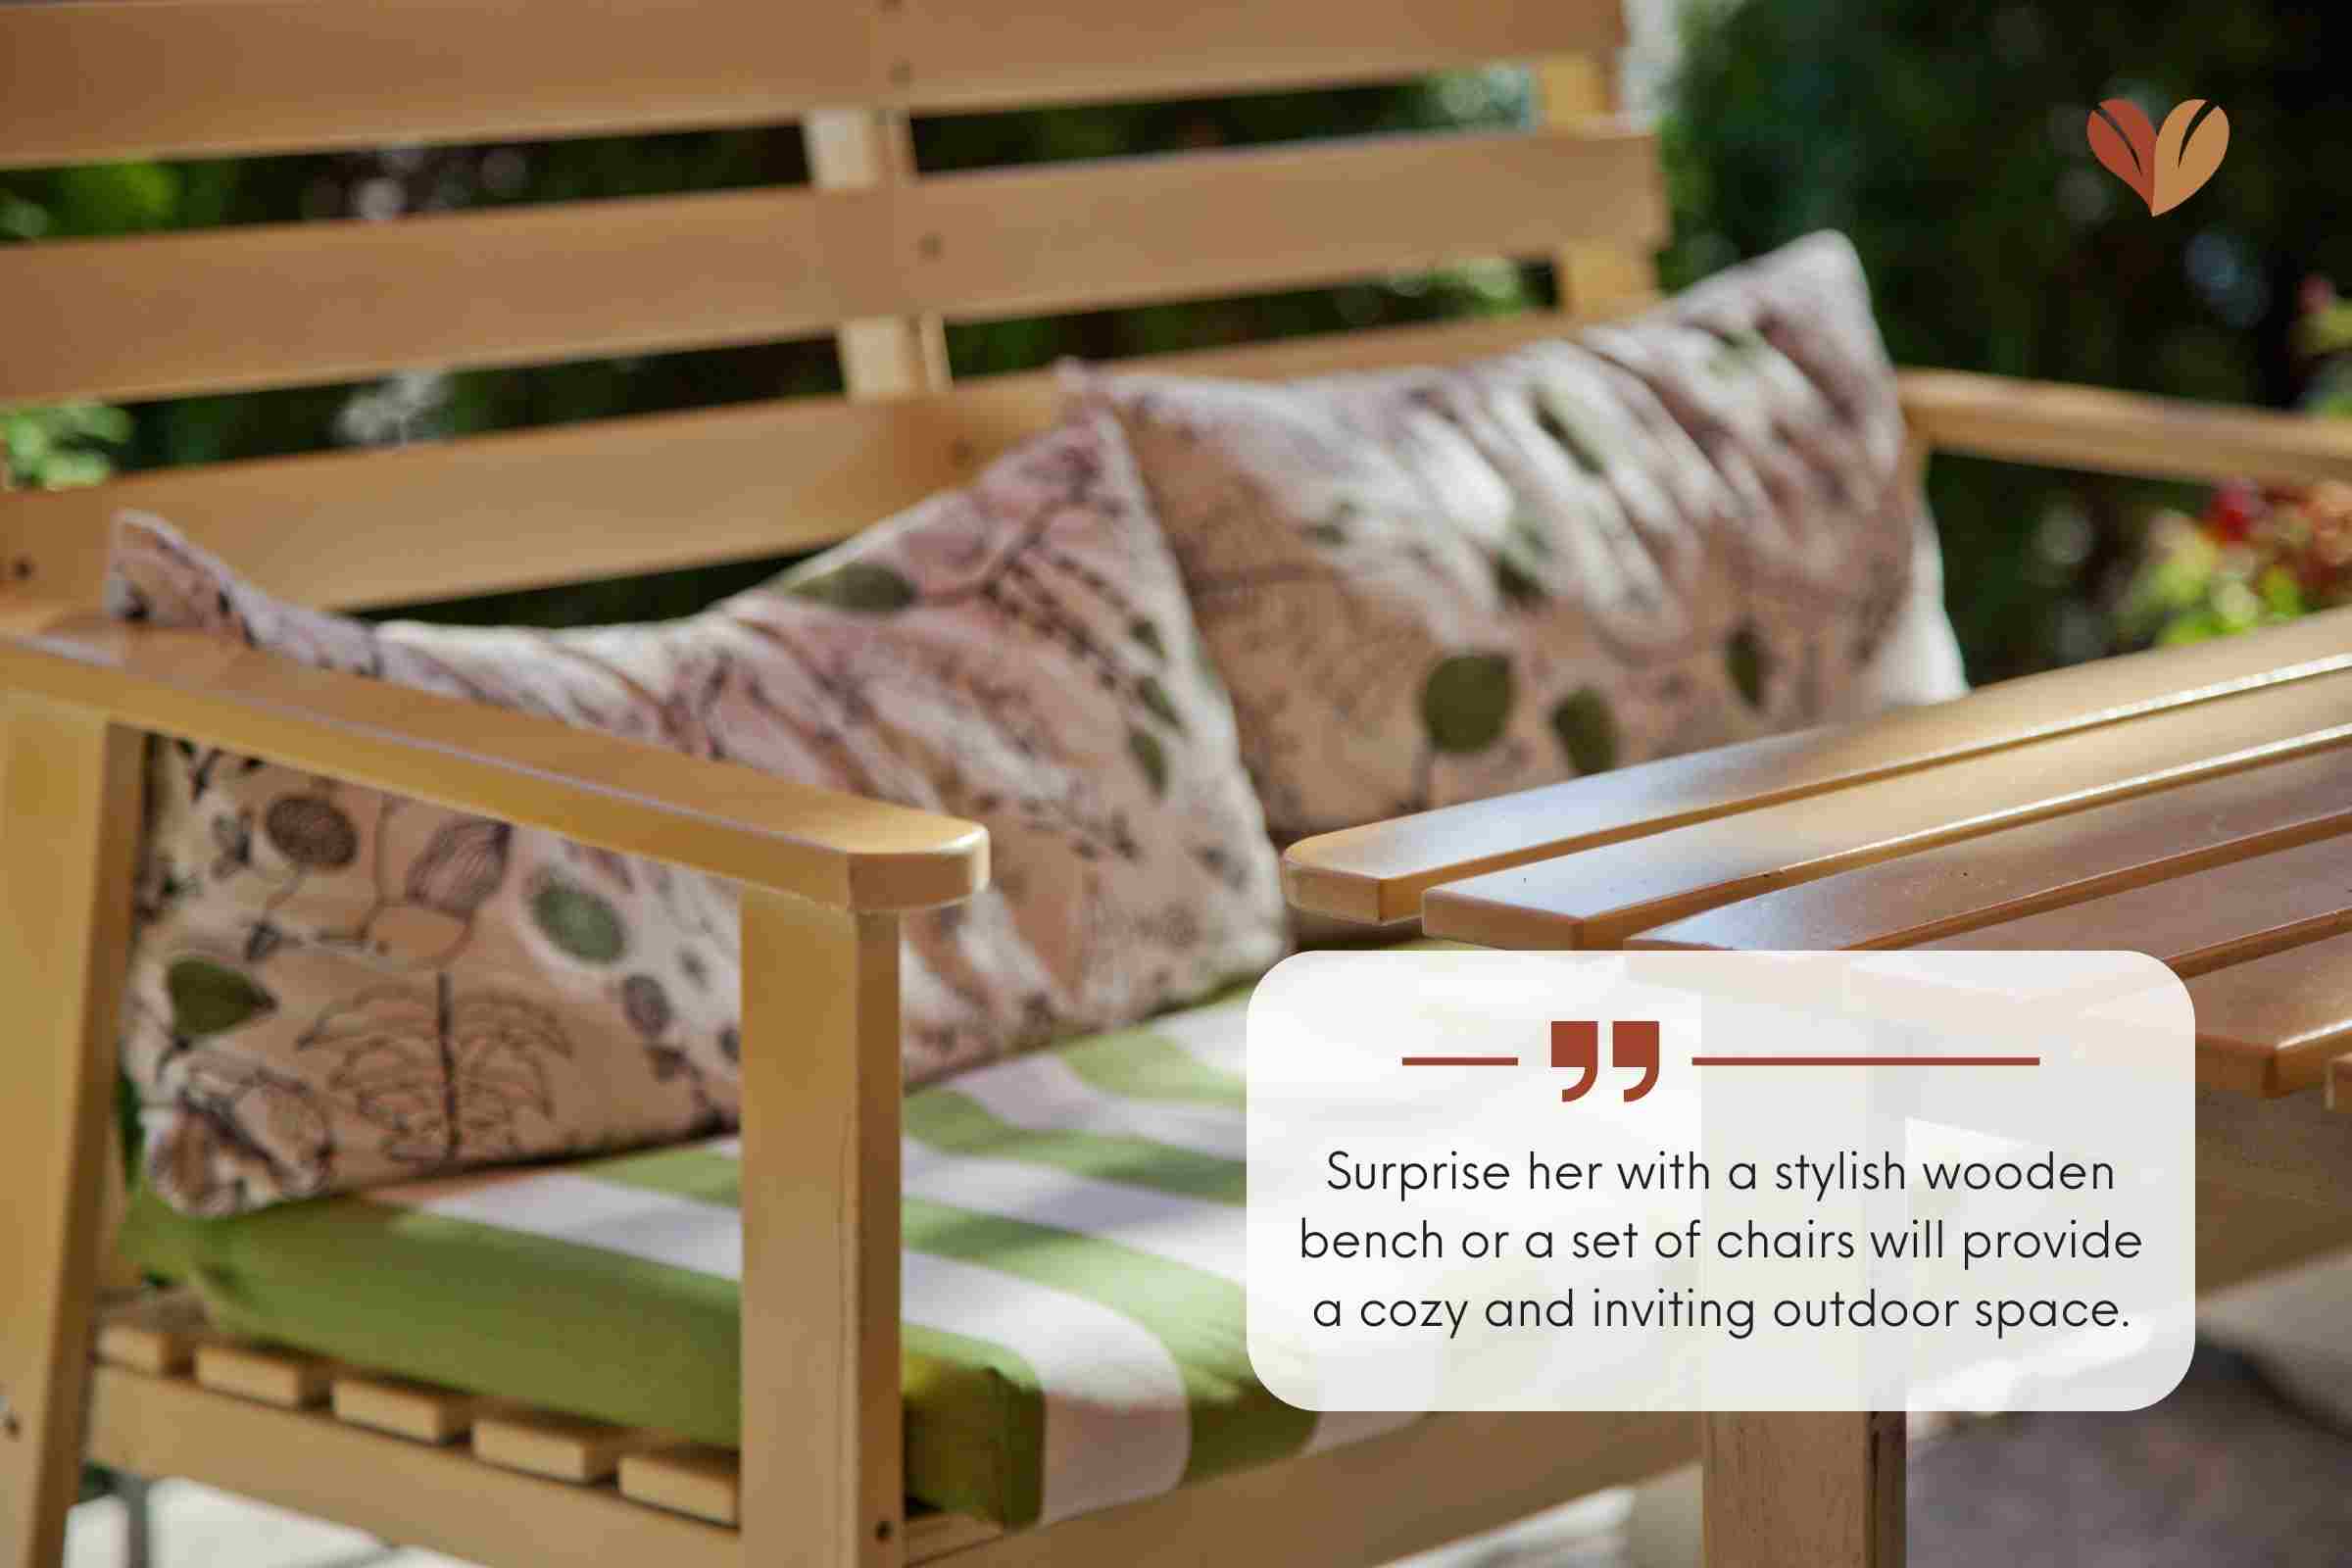 Surprise her with a stylish wooden bench or a set of chairs will provide a cozy and inviting outdoor space.